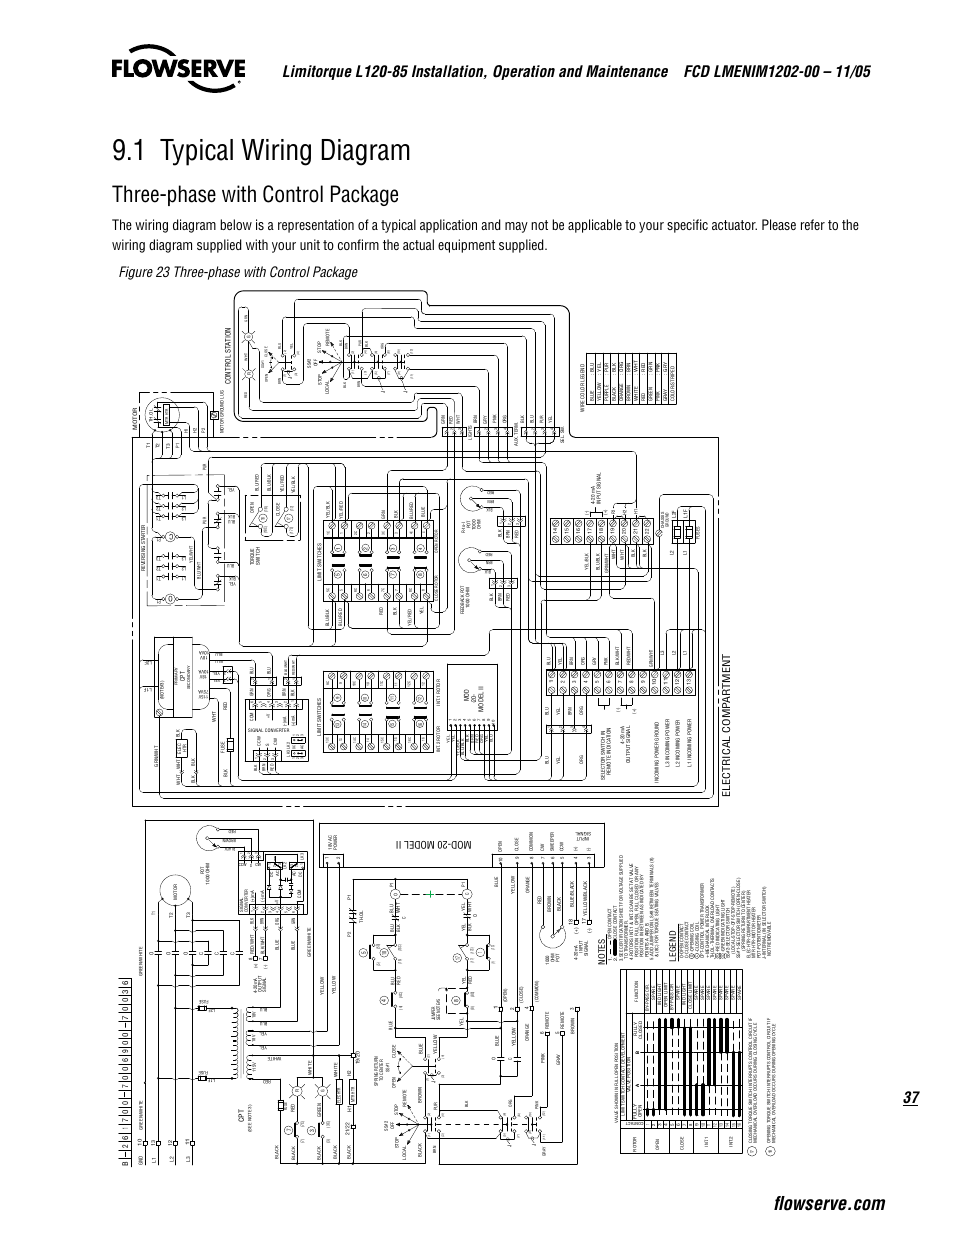 1 Typical Wiring Diagram  Three